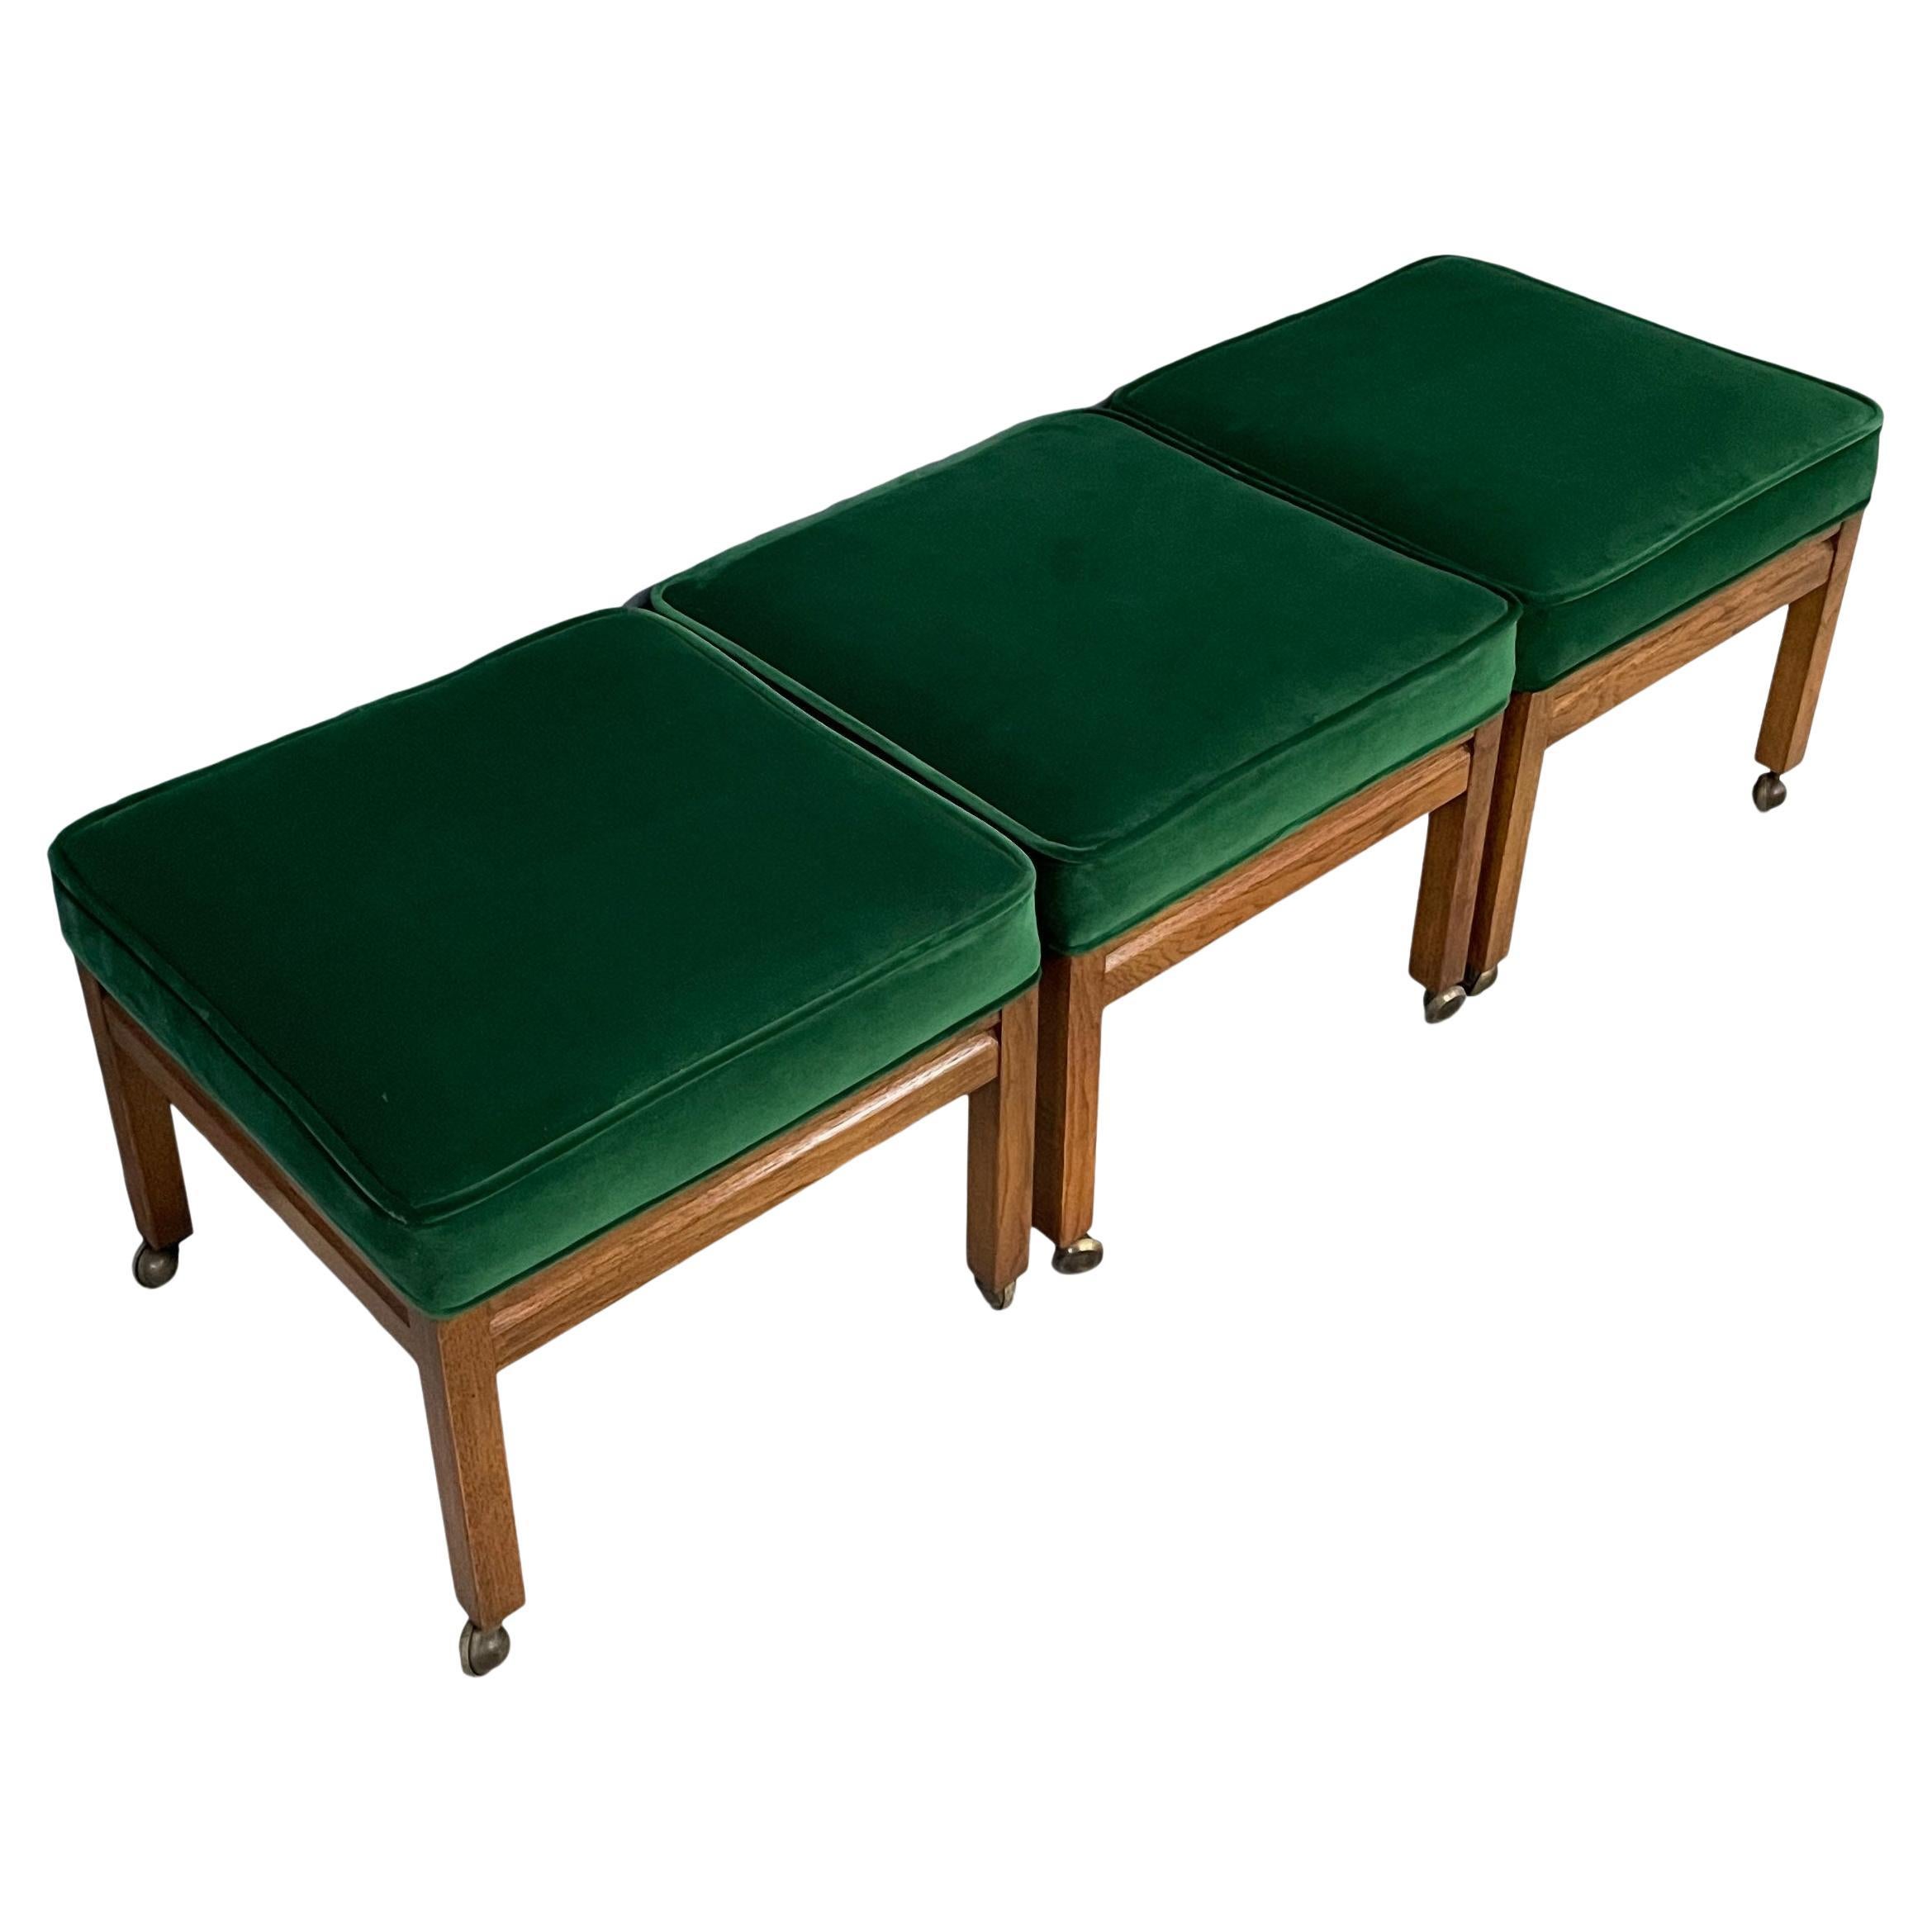 Trio of Square Upholstered Stools in Emerald Velvet and Pecan Probber Style